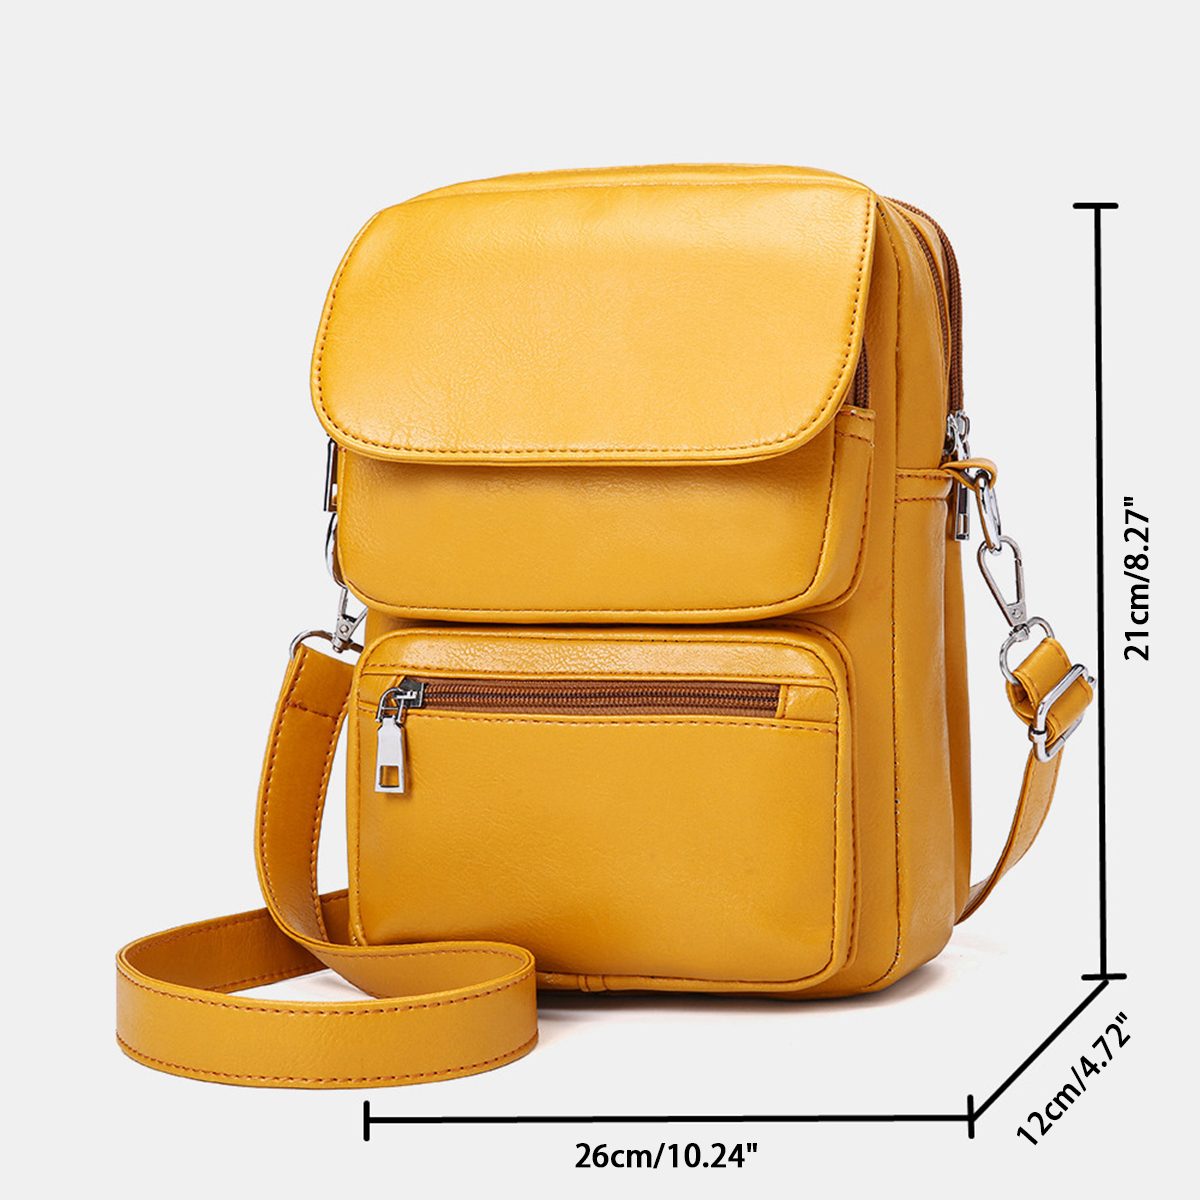 Fashion-Casual-Large-Capacity-with-Multi-Pocket-Mobile-Phone-Tablet-Storage-Crossbody-Shoulder-Bag-B-1642780-12